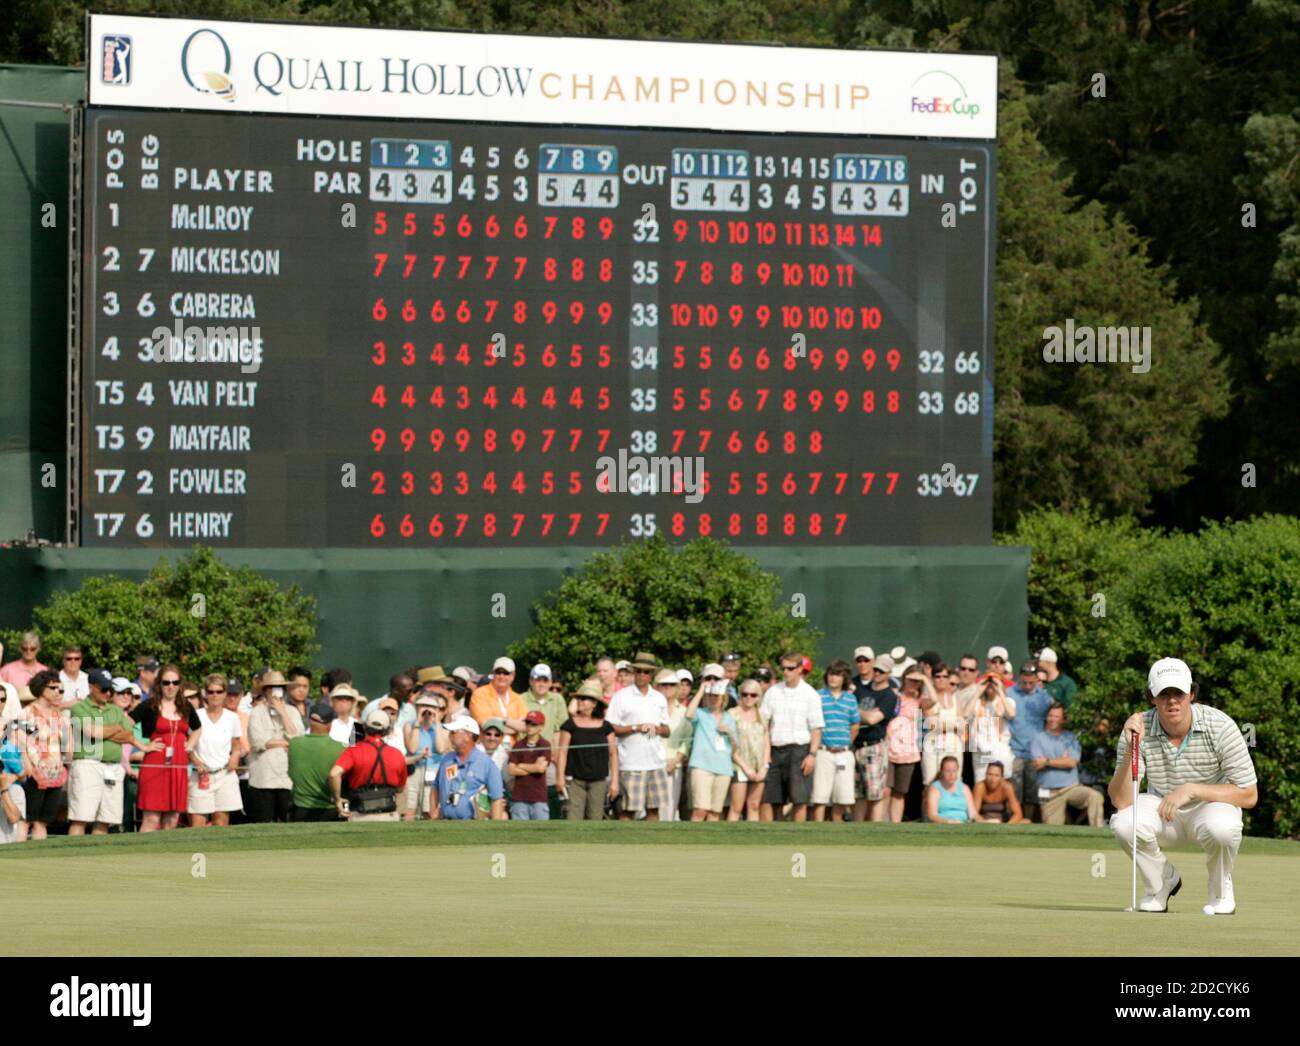 Rory McIlroy of Northern Ireland lines up his putt at the 18th green during the final round of the Quail Hollow Championship in Charlotte, North Carolina May 2, 2010. REUTERS/Jason Miczek (UNITED STATES - Tags: SPORT GOLF) Stock Photo